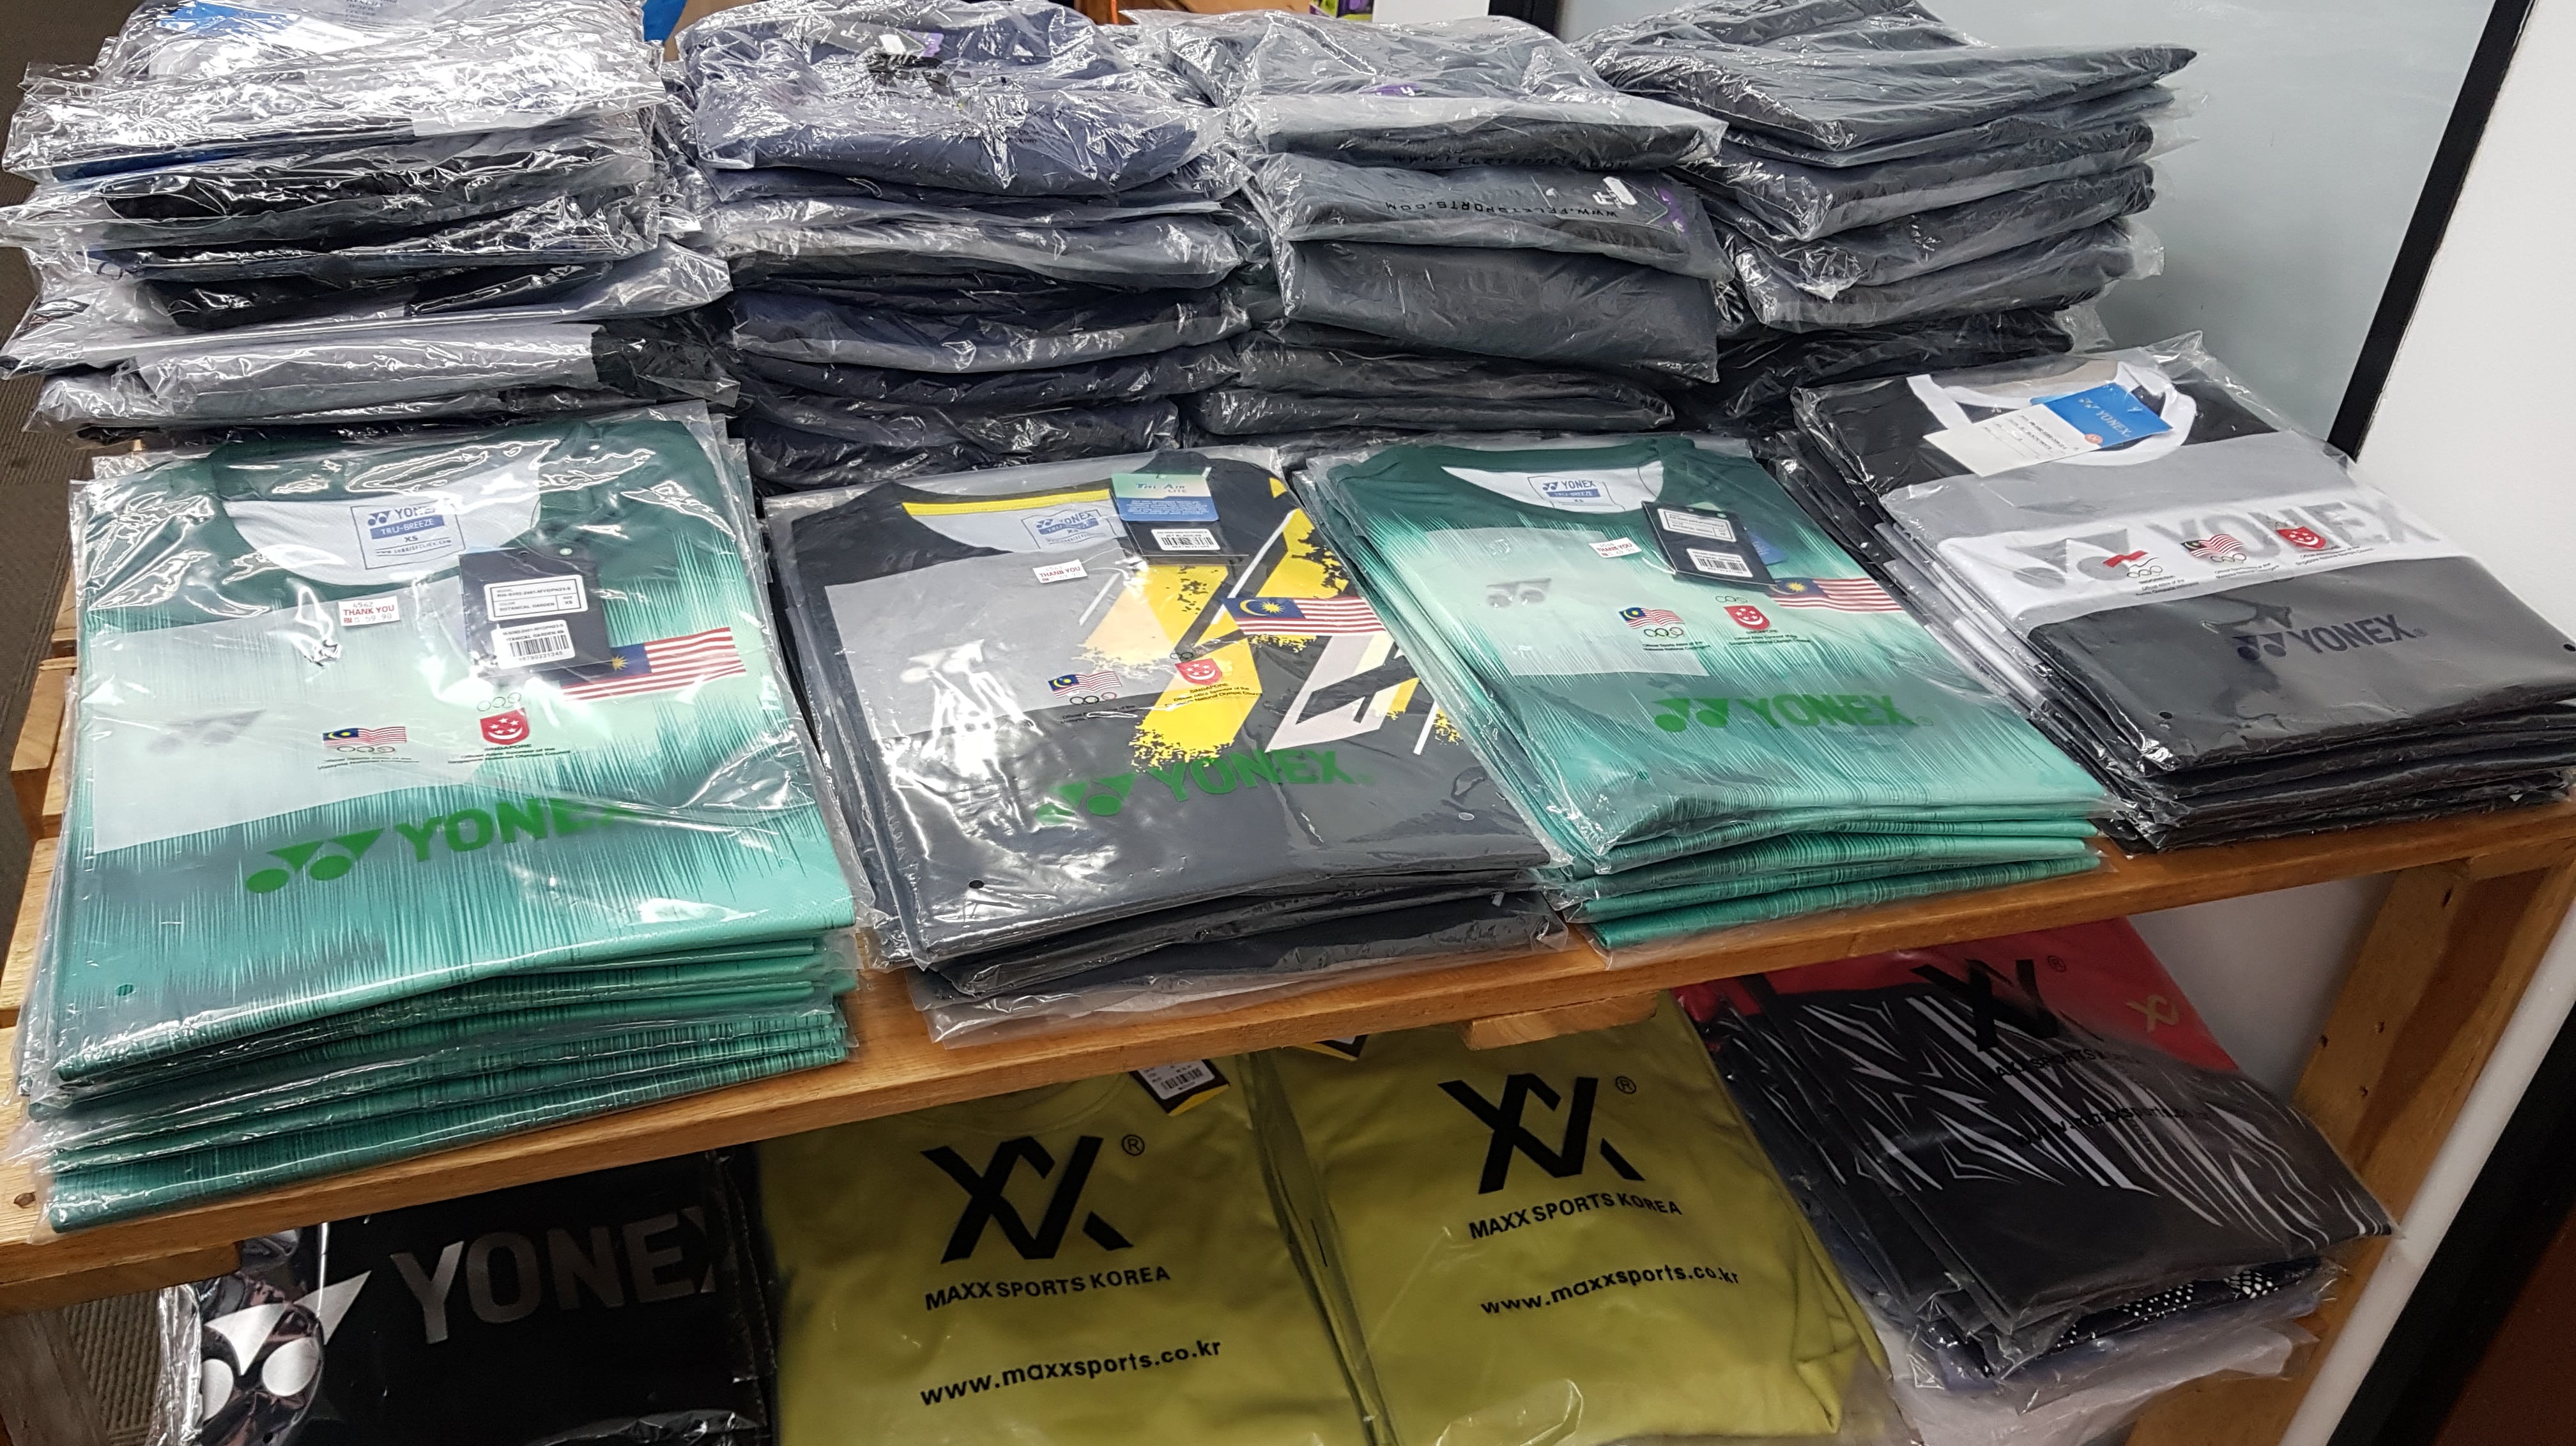 More Shirts For Sale at PJ South Outlet